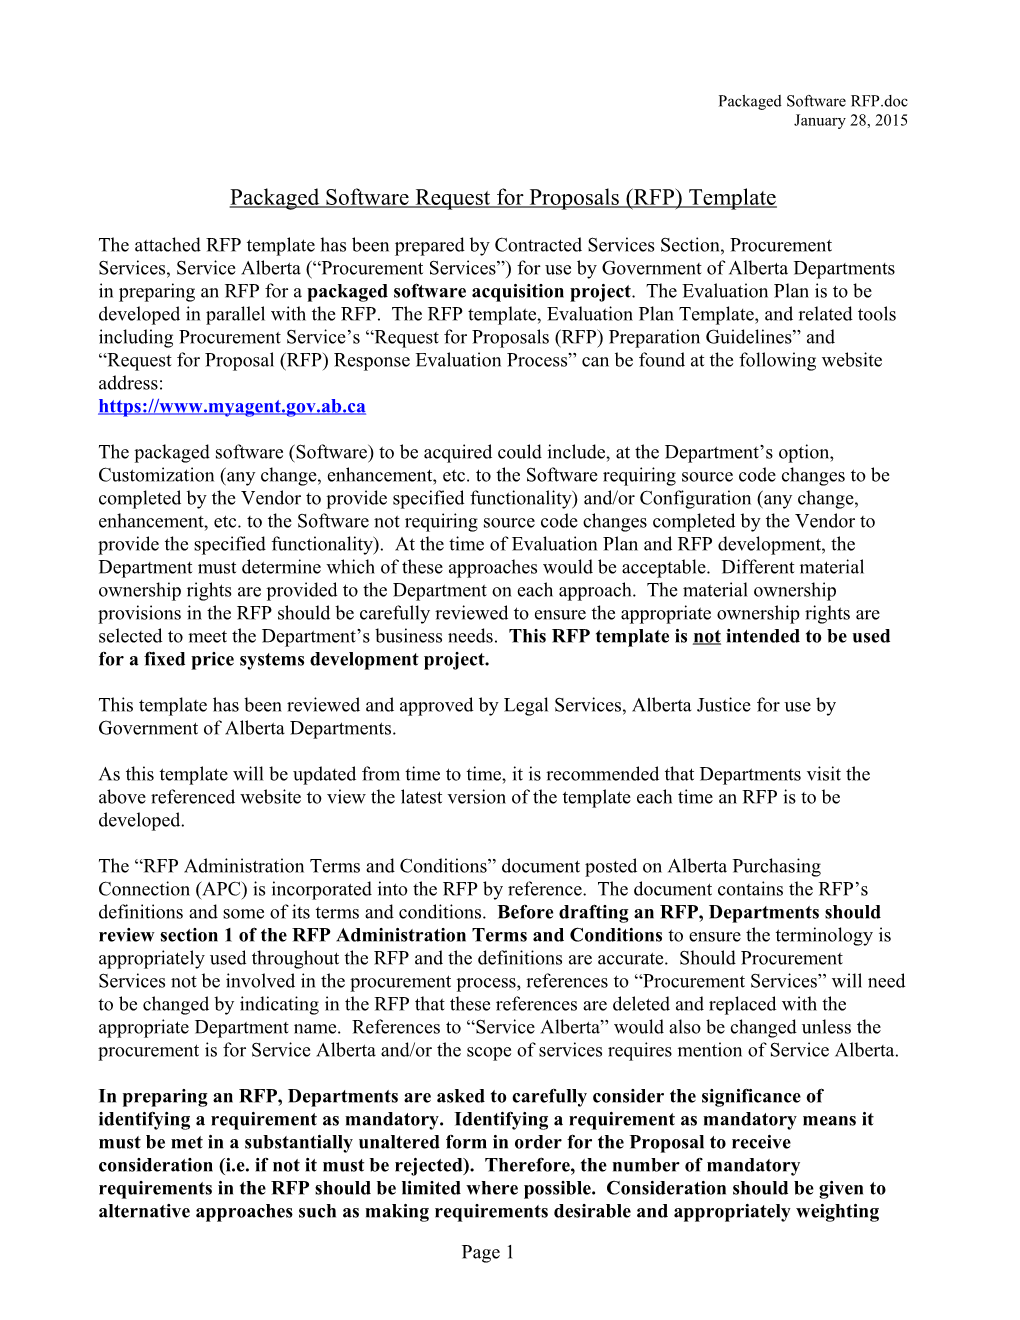 Packaged Software RFP Template